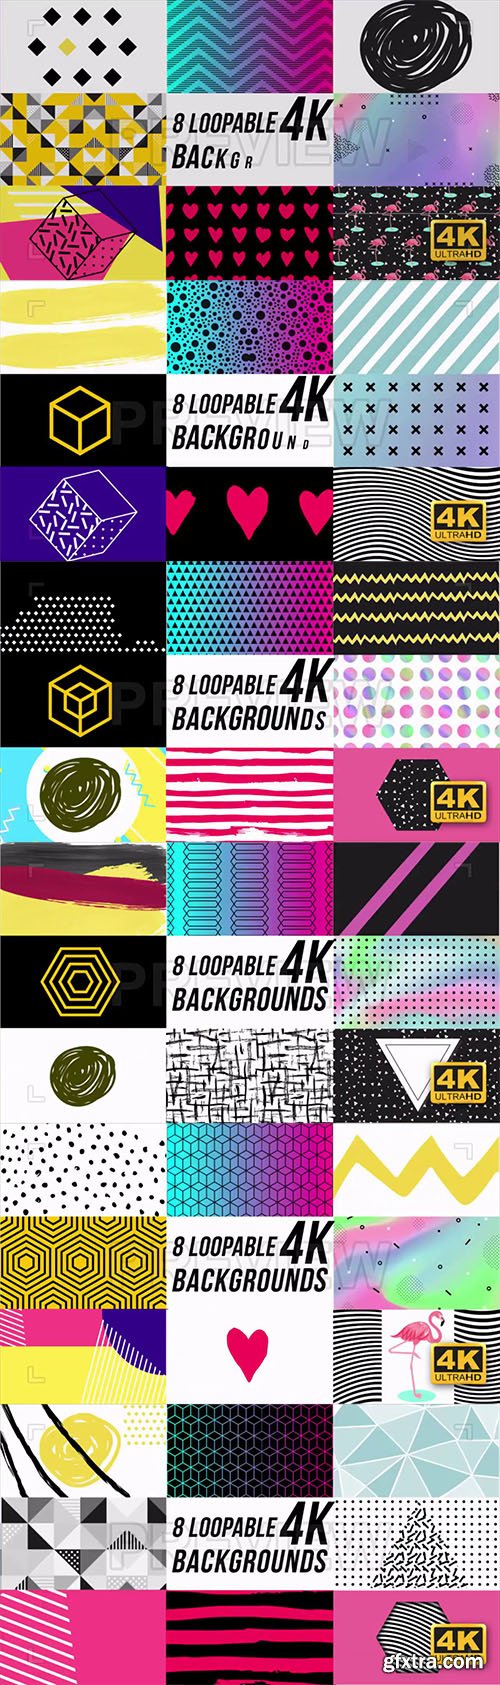 8 Trendy Loopable Backgrounds 68849